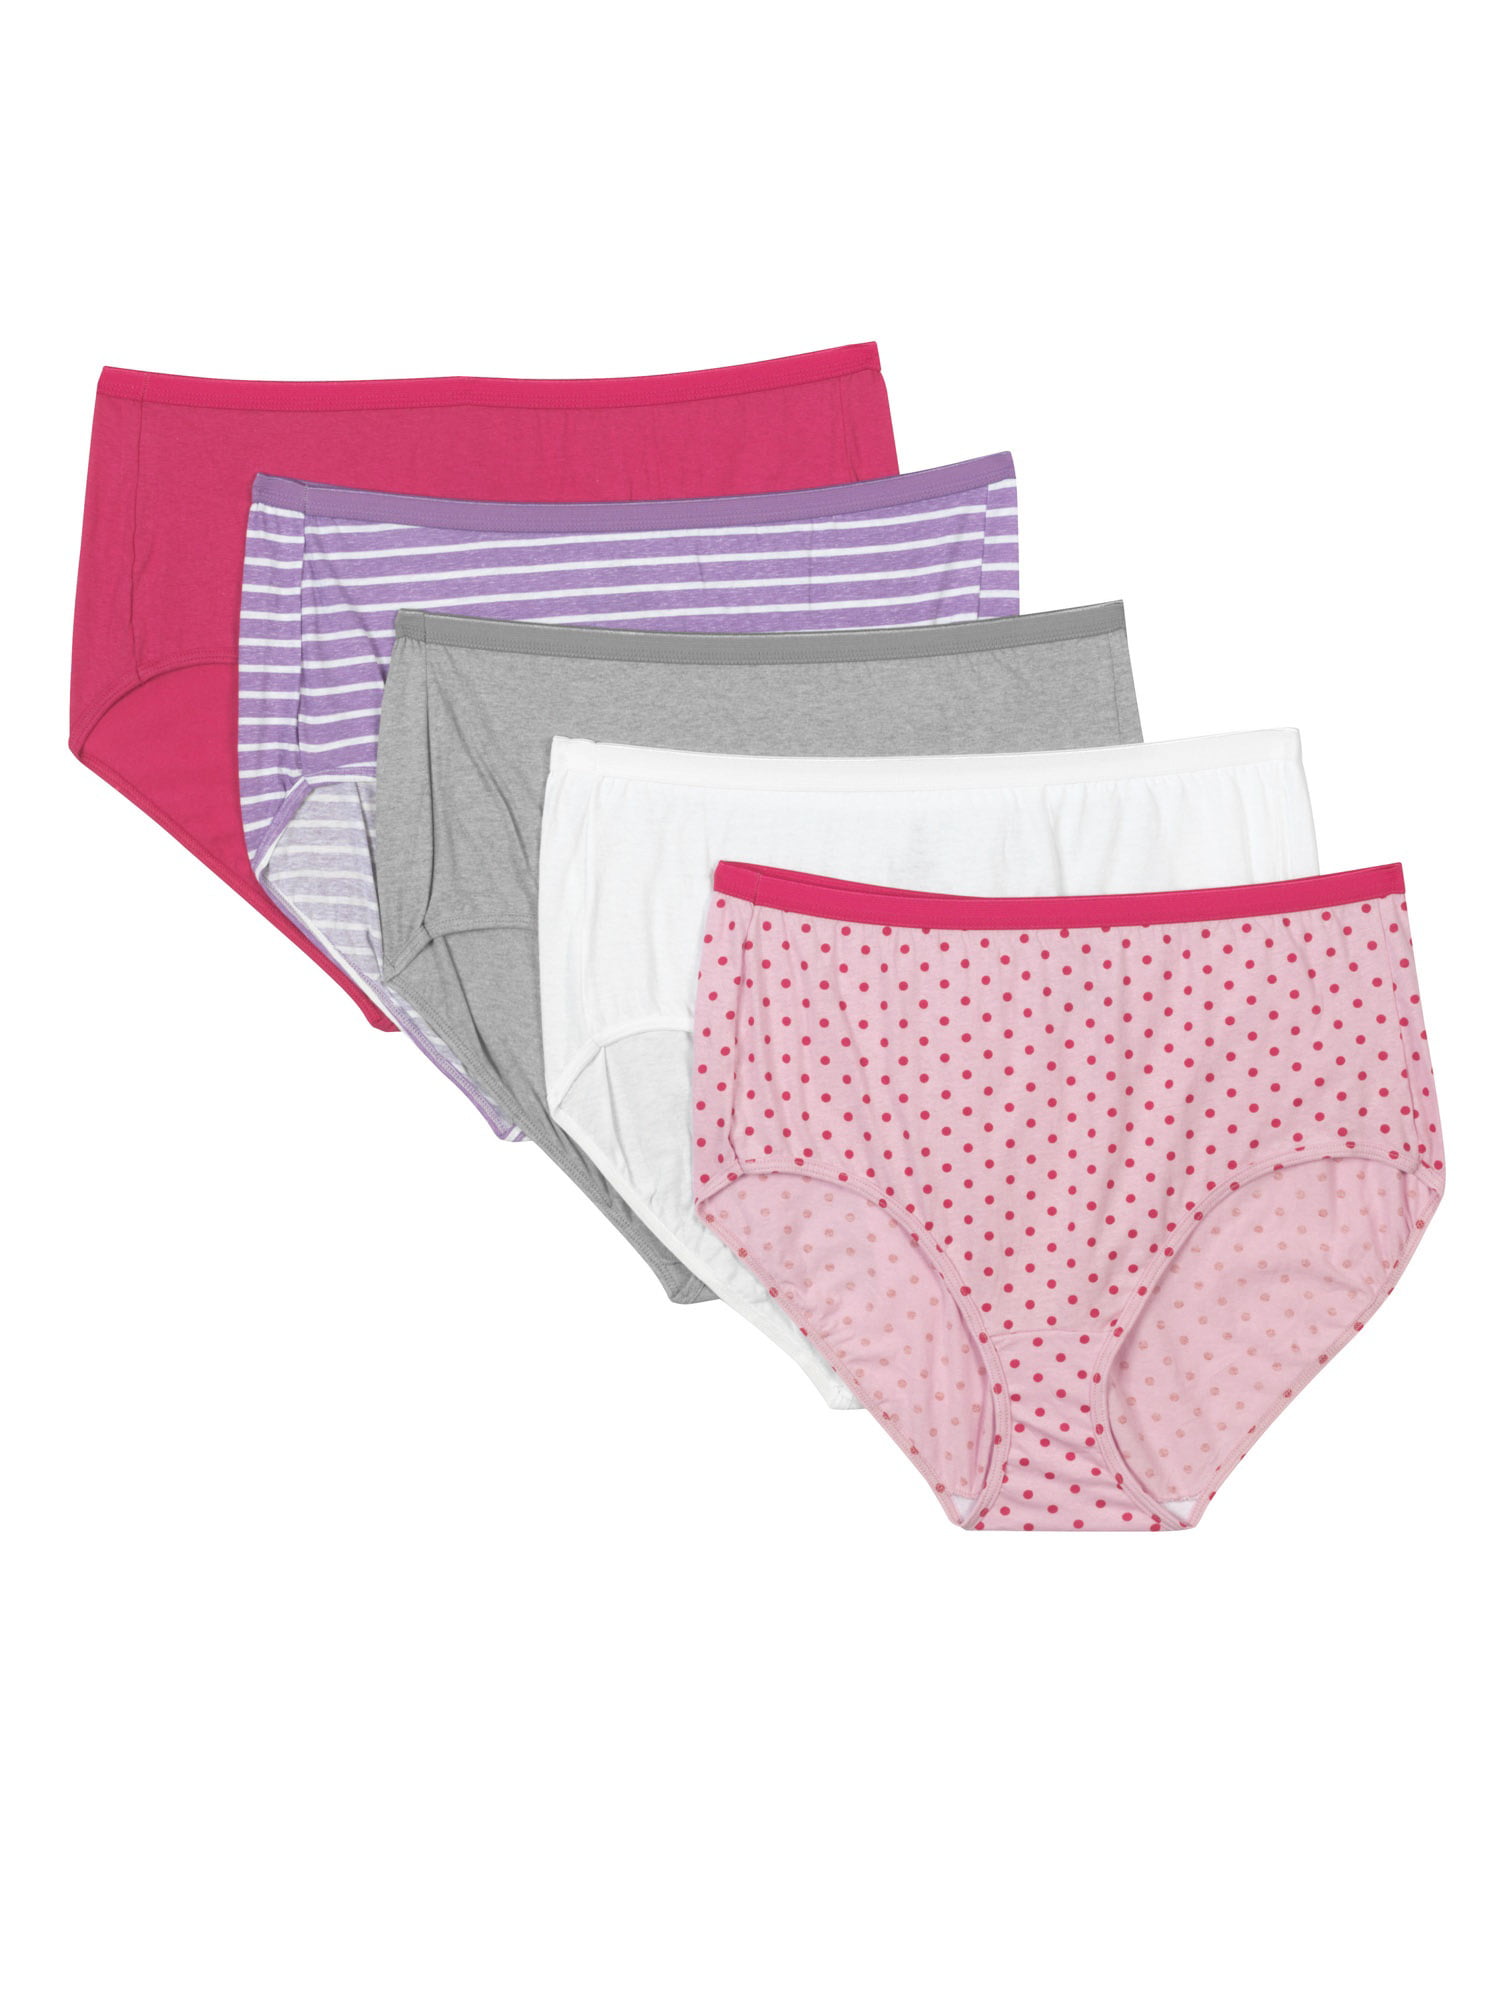 Just My Size Women's Plus Tagless White Cotton Briefs 5-Pack